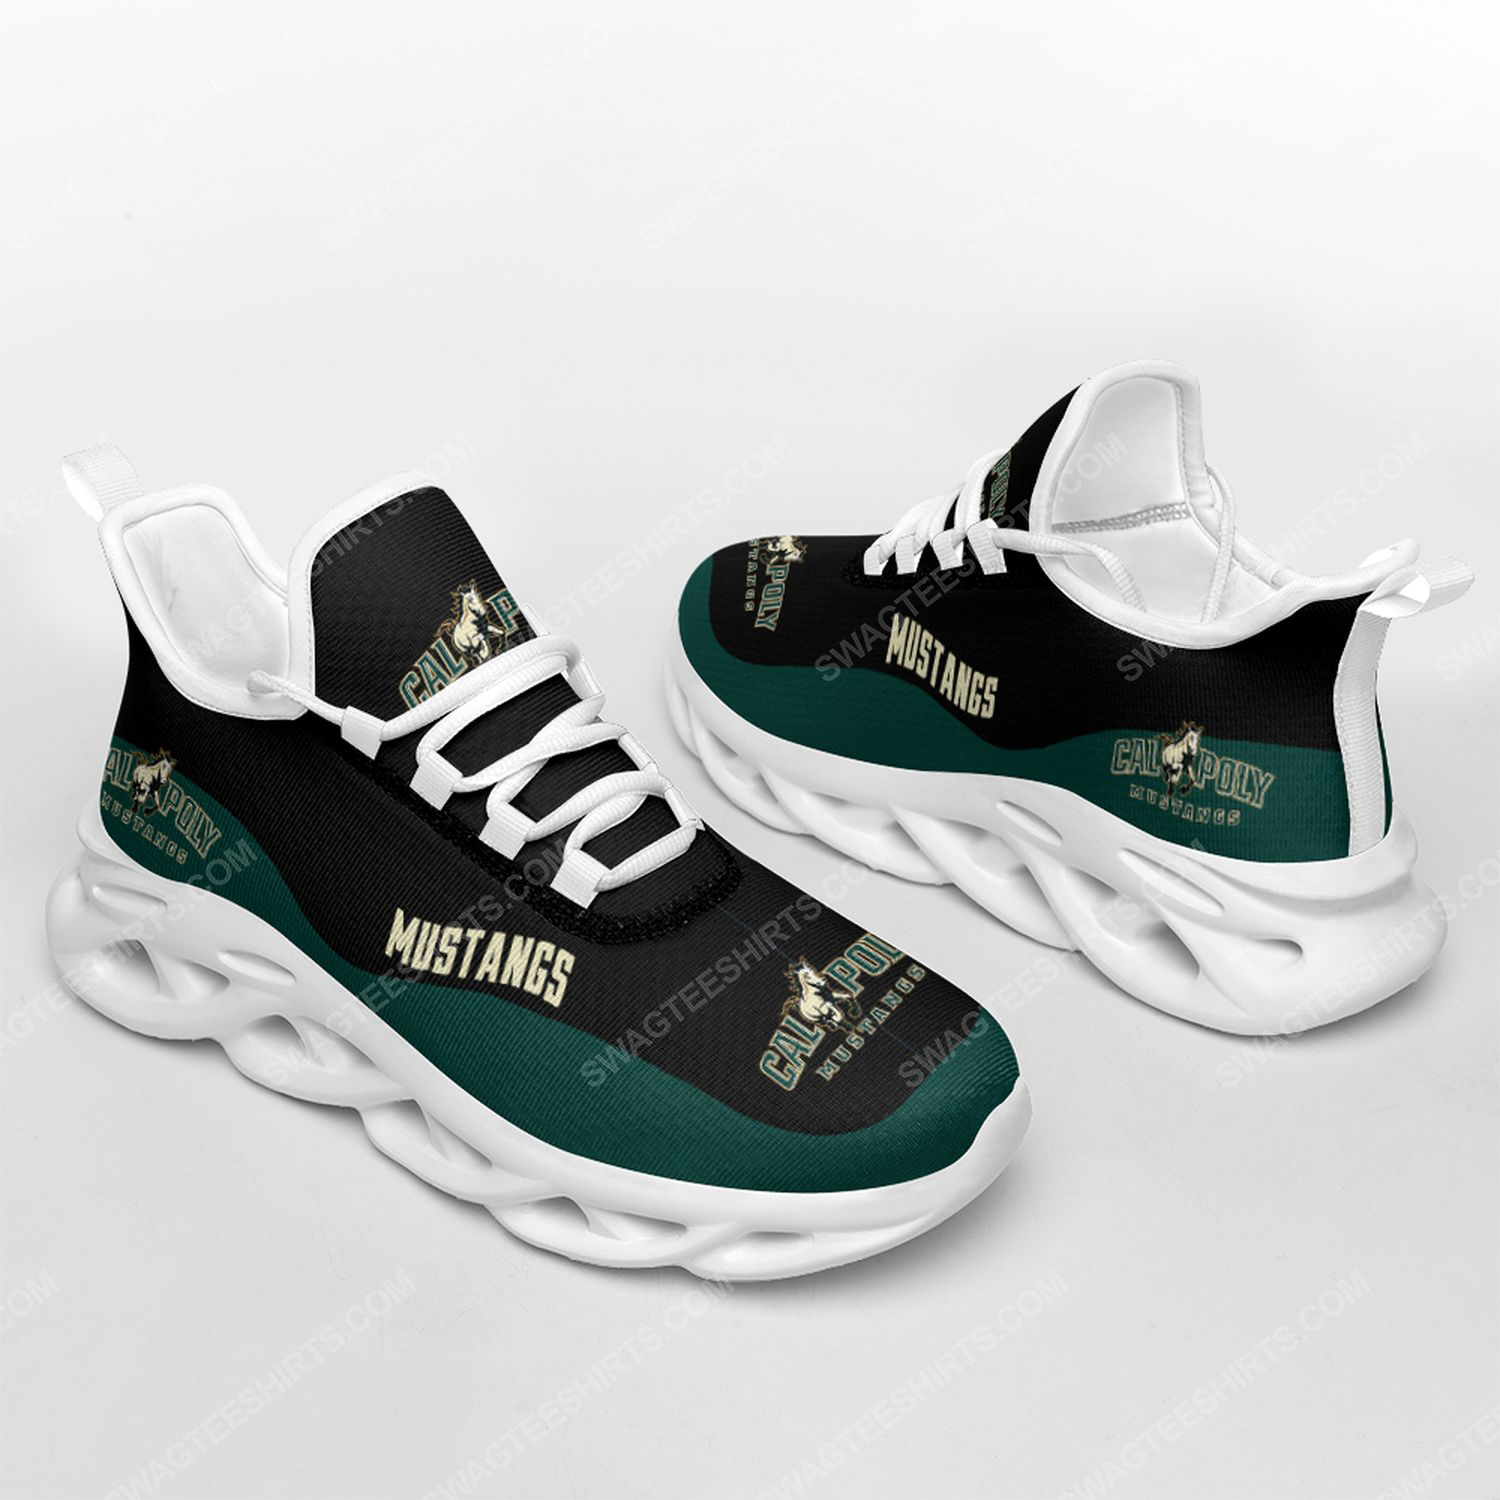 The cal poly mustangs football team max soul shoes 2